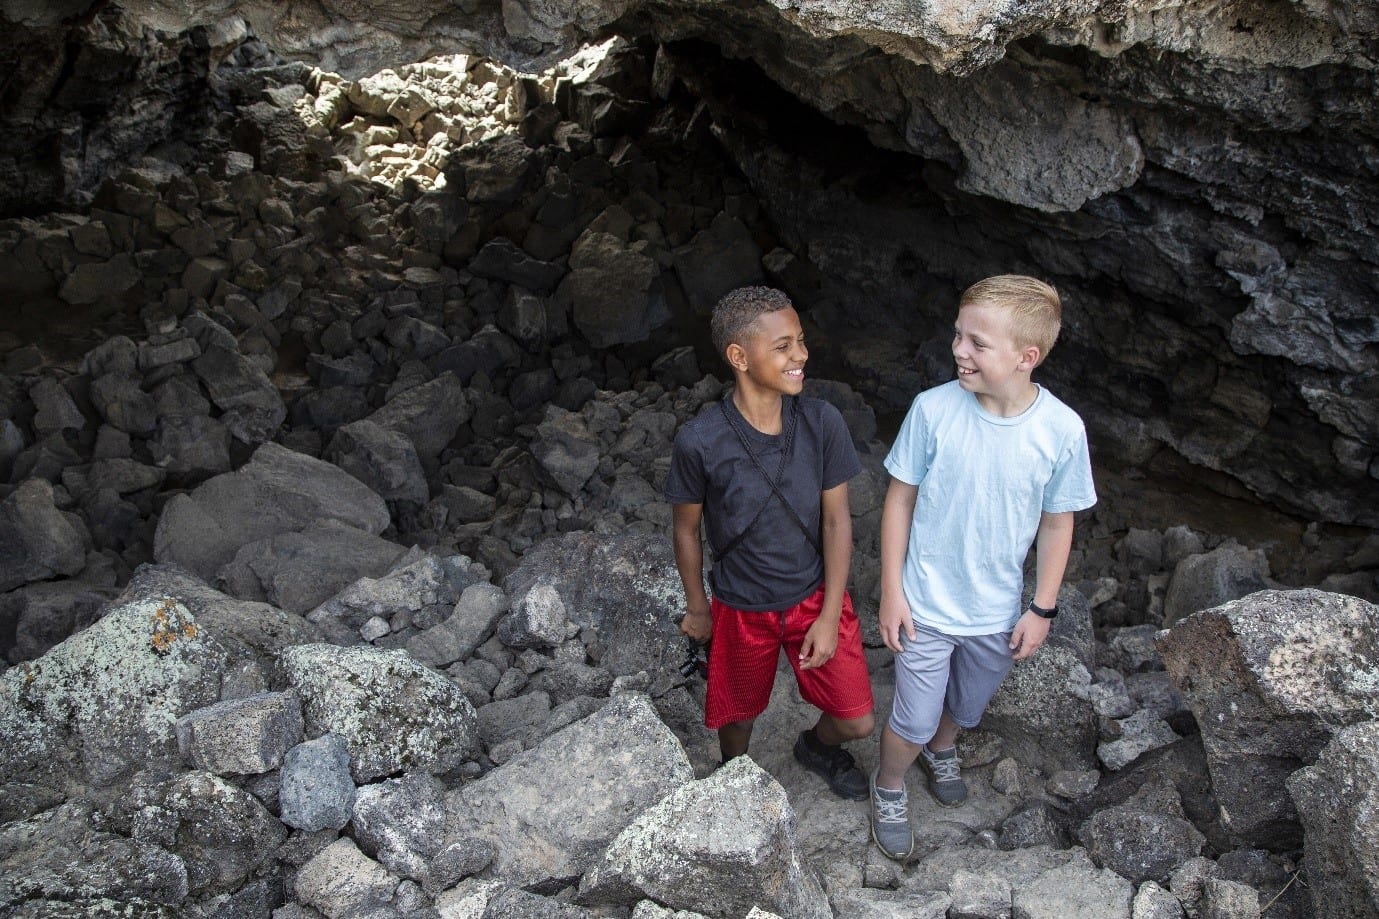 Two boys exploring a cave